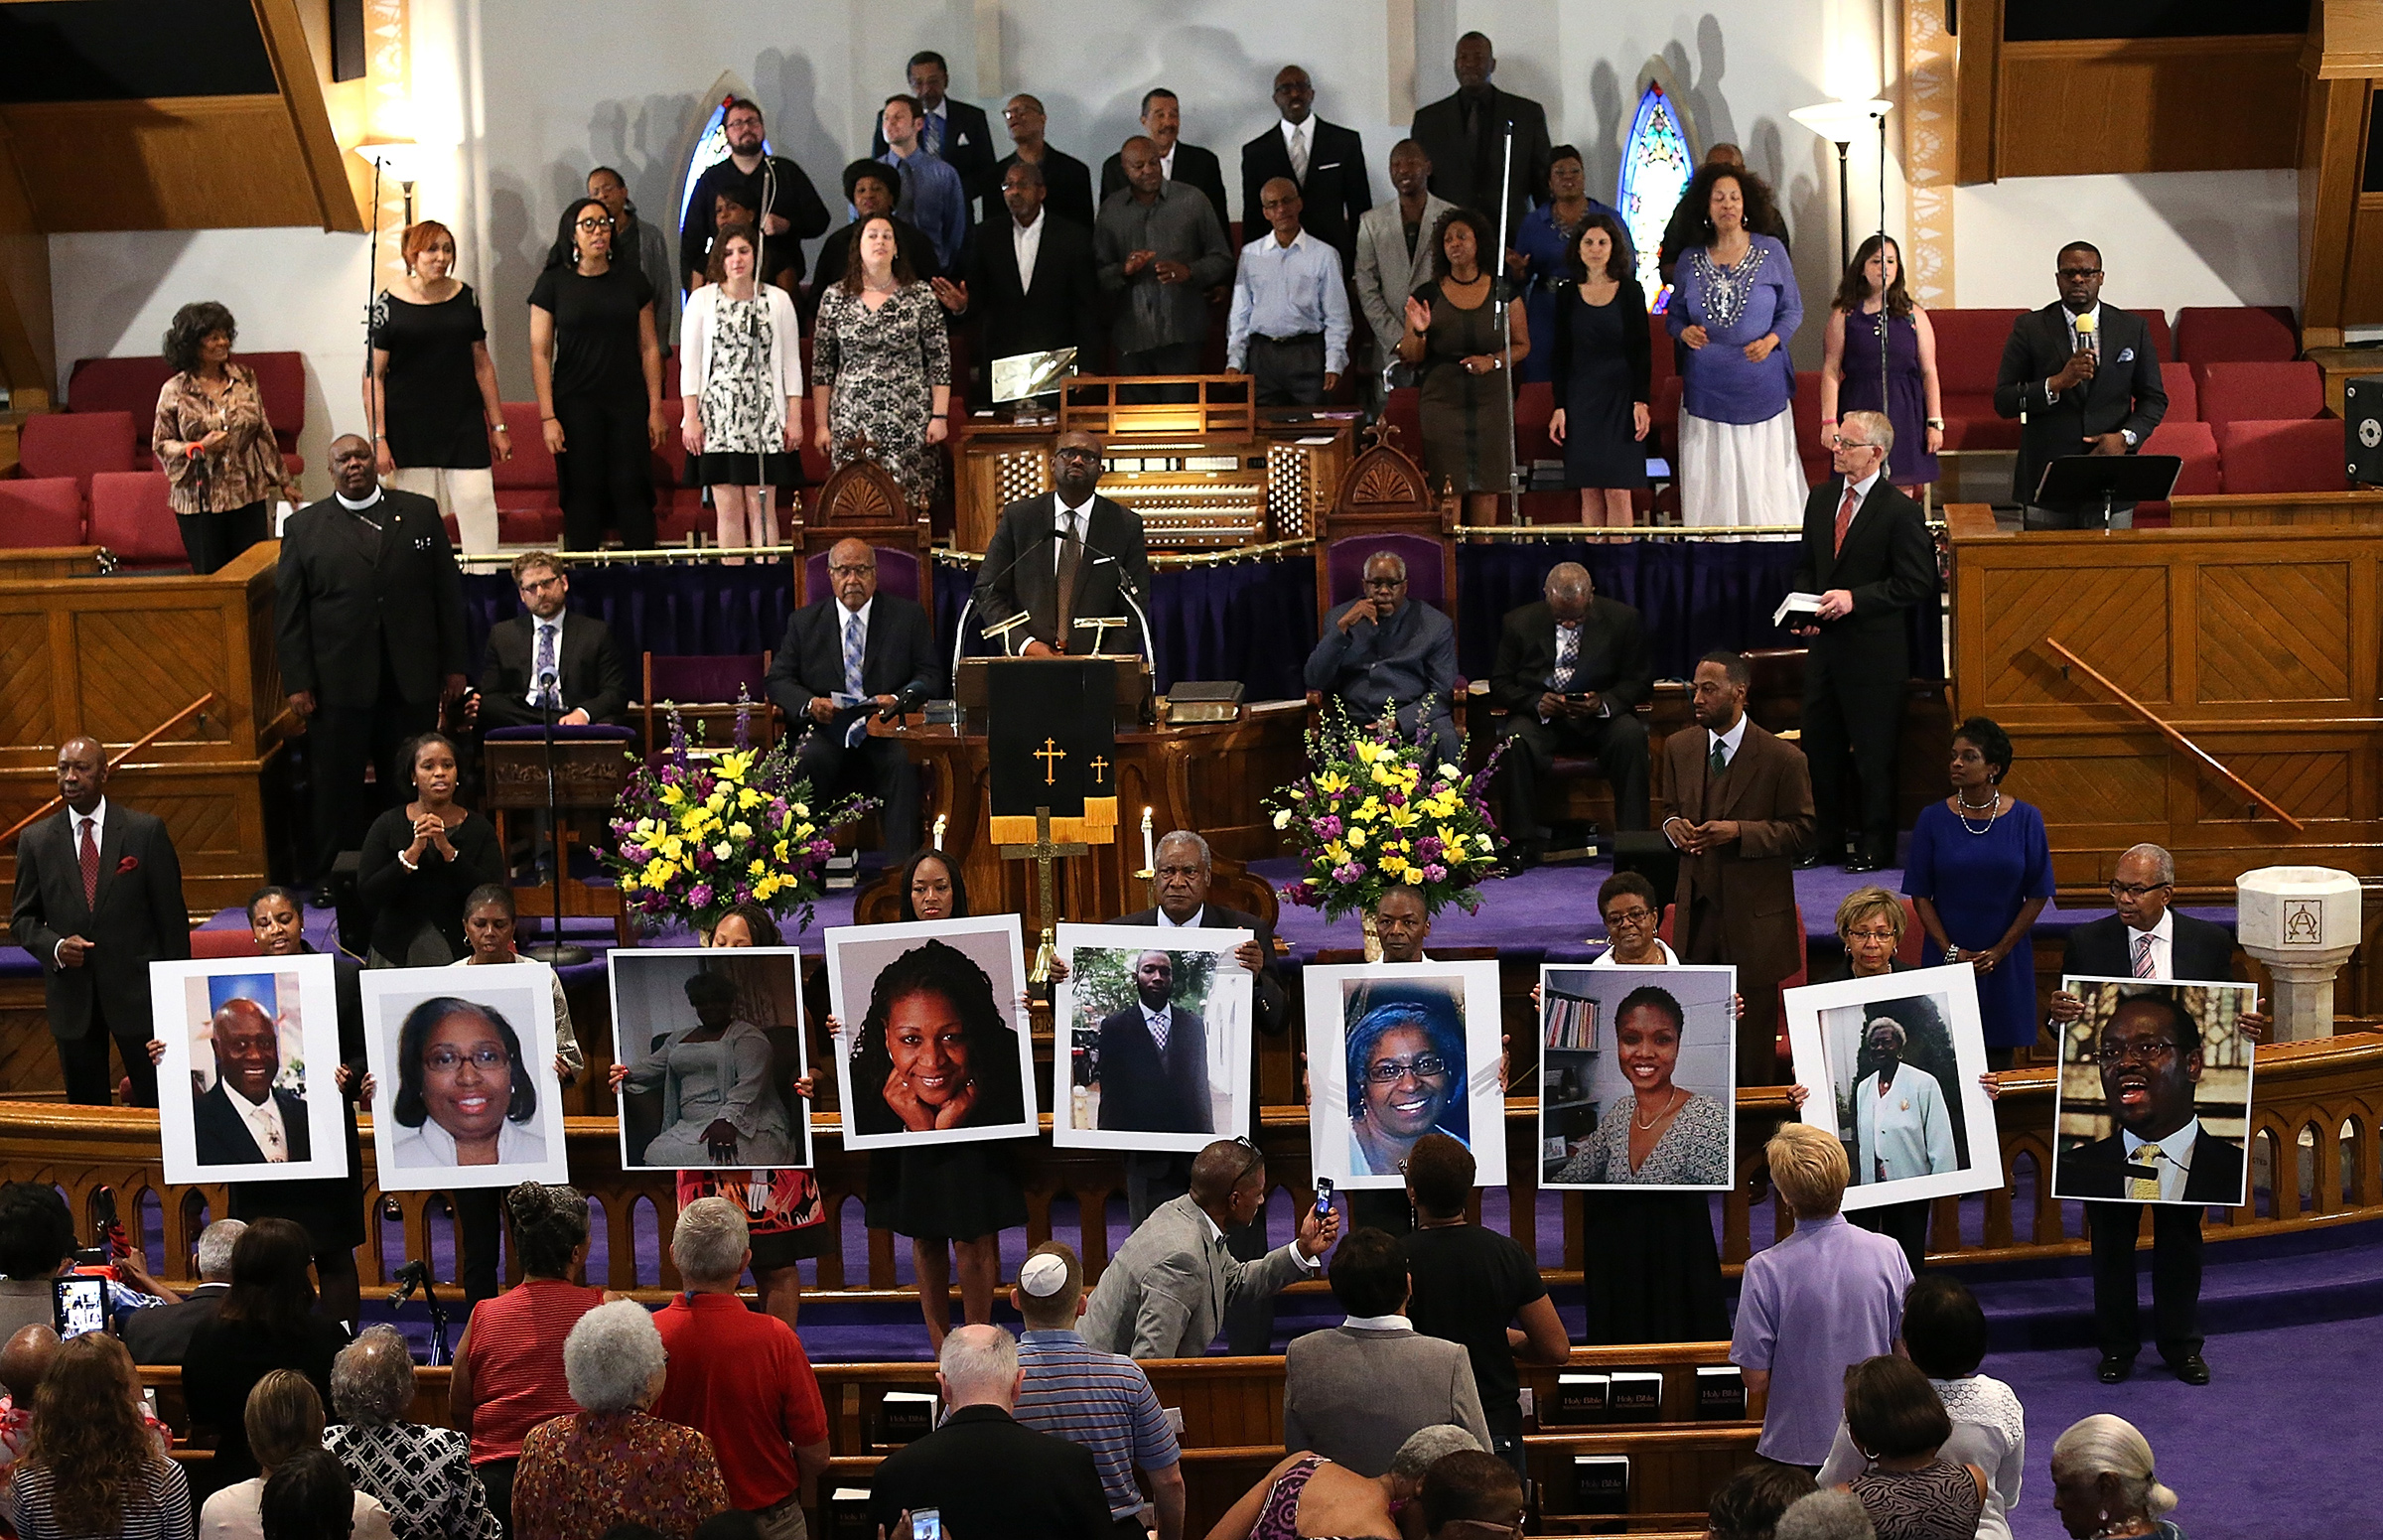 Photographs of the nine victims killed at the Emanuel African Methodist Episcopal Church in Charleston are held up by congregants during a prayer vigil at the the Metropolitan AME Church June 19, 2015 in Washington, DC. (Win McNamee—Getty Images)